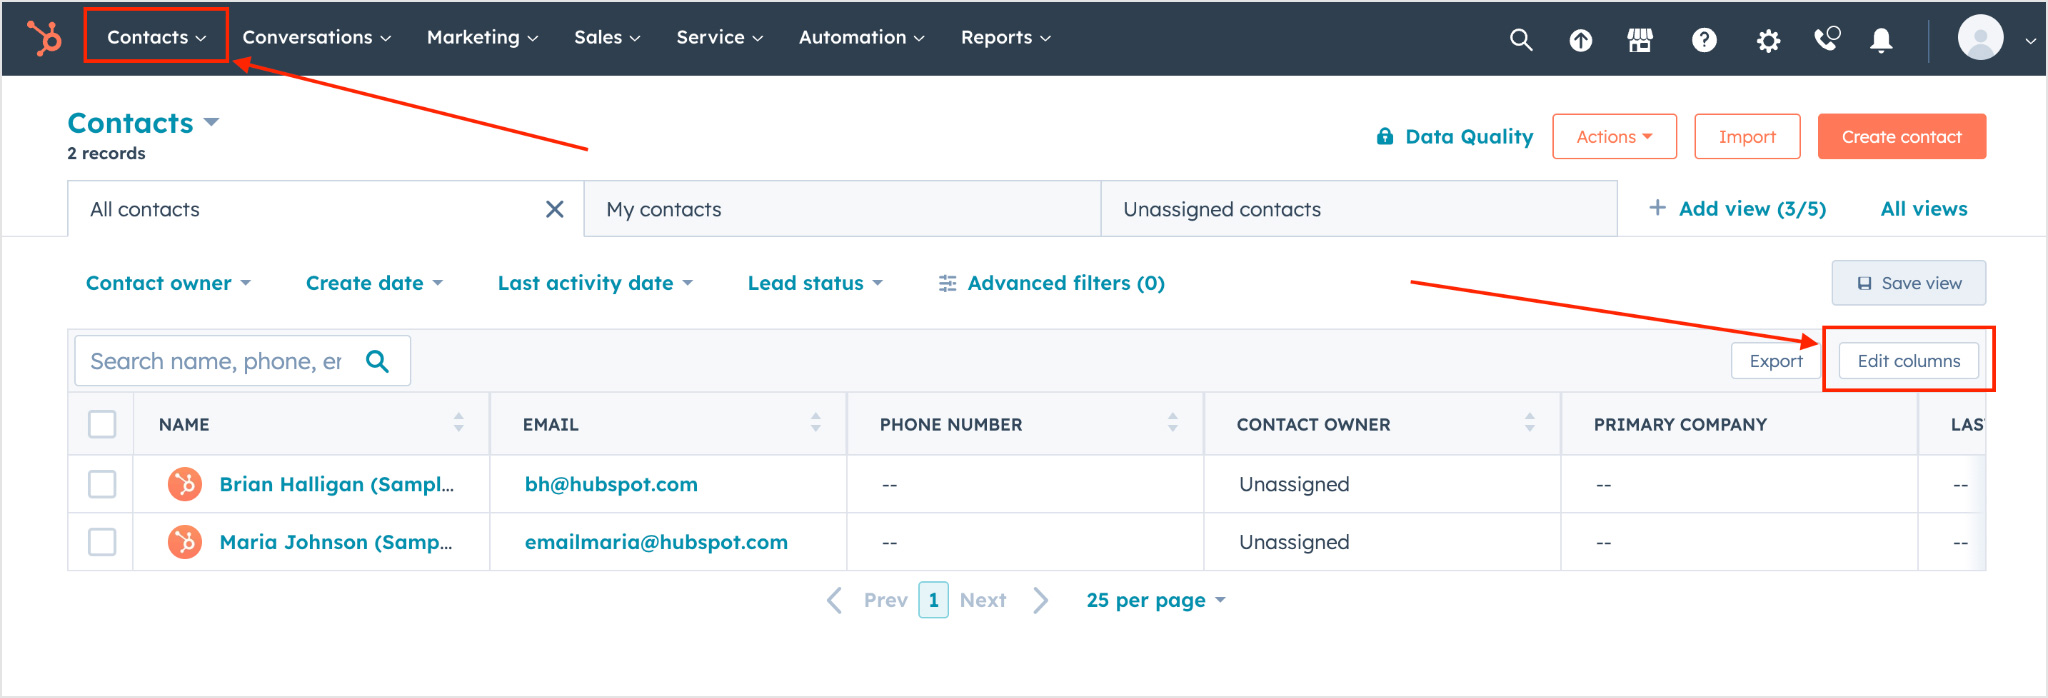 custom Field 1, custom Field 2, sex, and age fields are not preset in Hubspot and must be added using the UID listed next to the field name. To do this, go to the contacts section of your Hubspot account and click Edit columns in the contacts’ table.